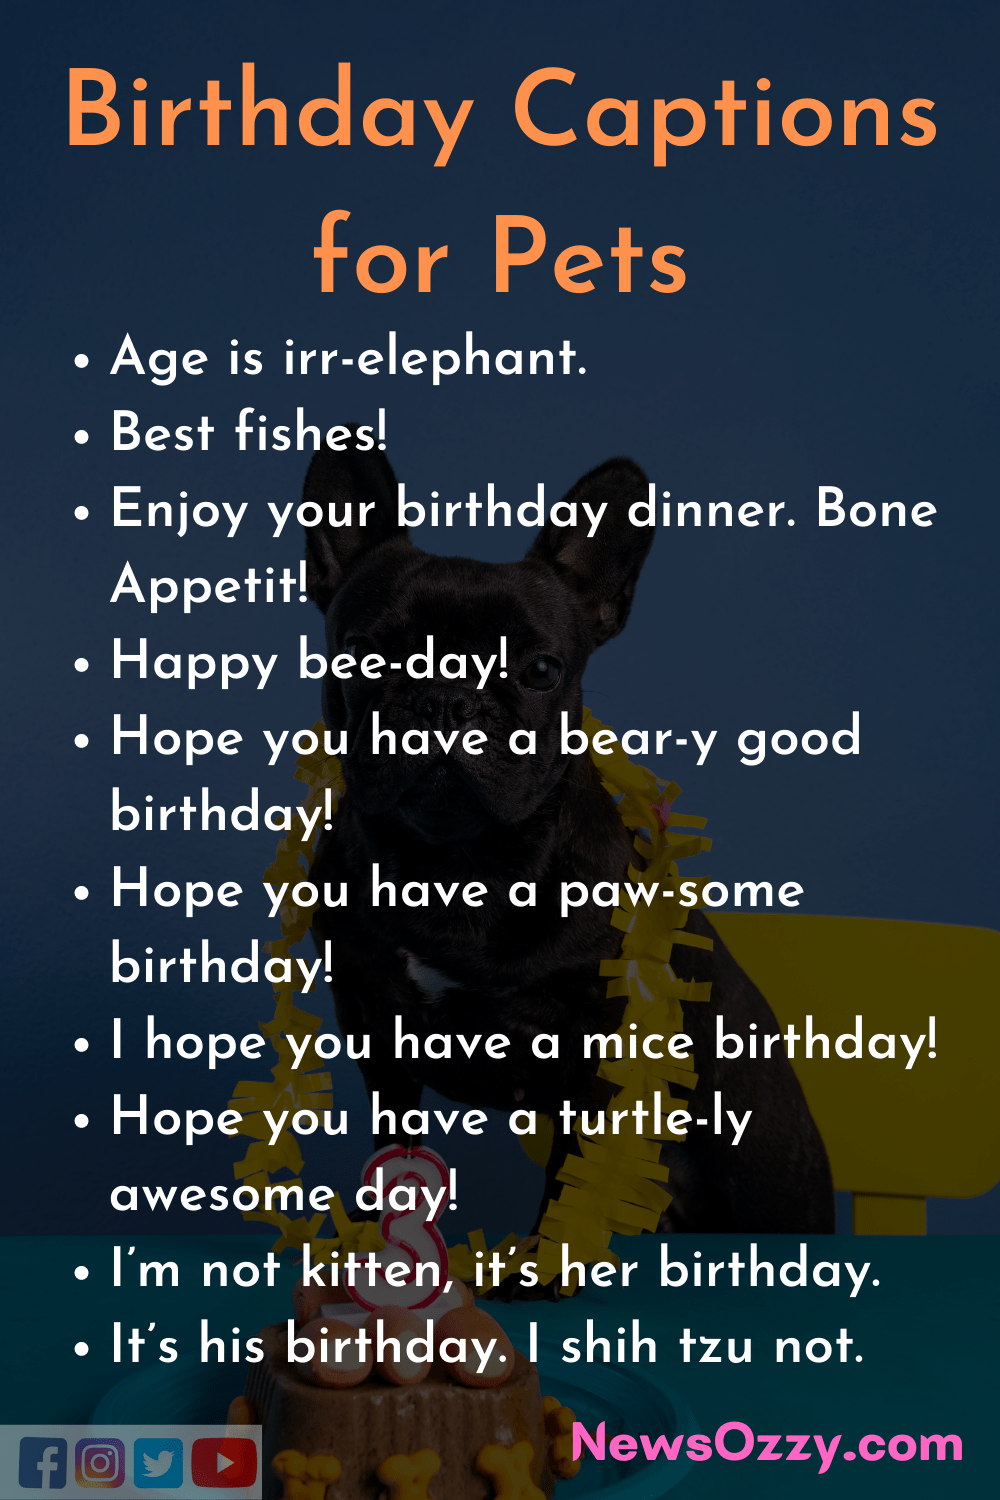 Birthday captions for pets